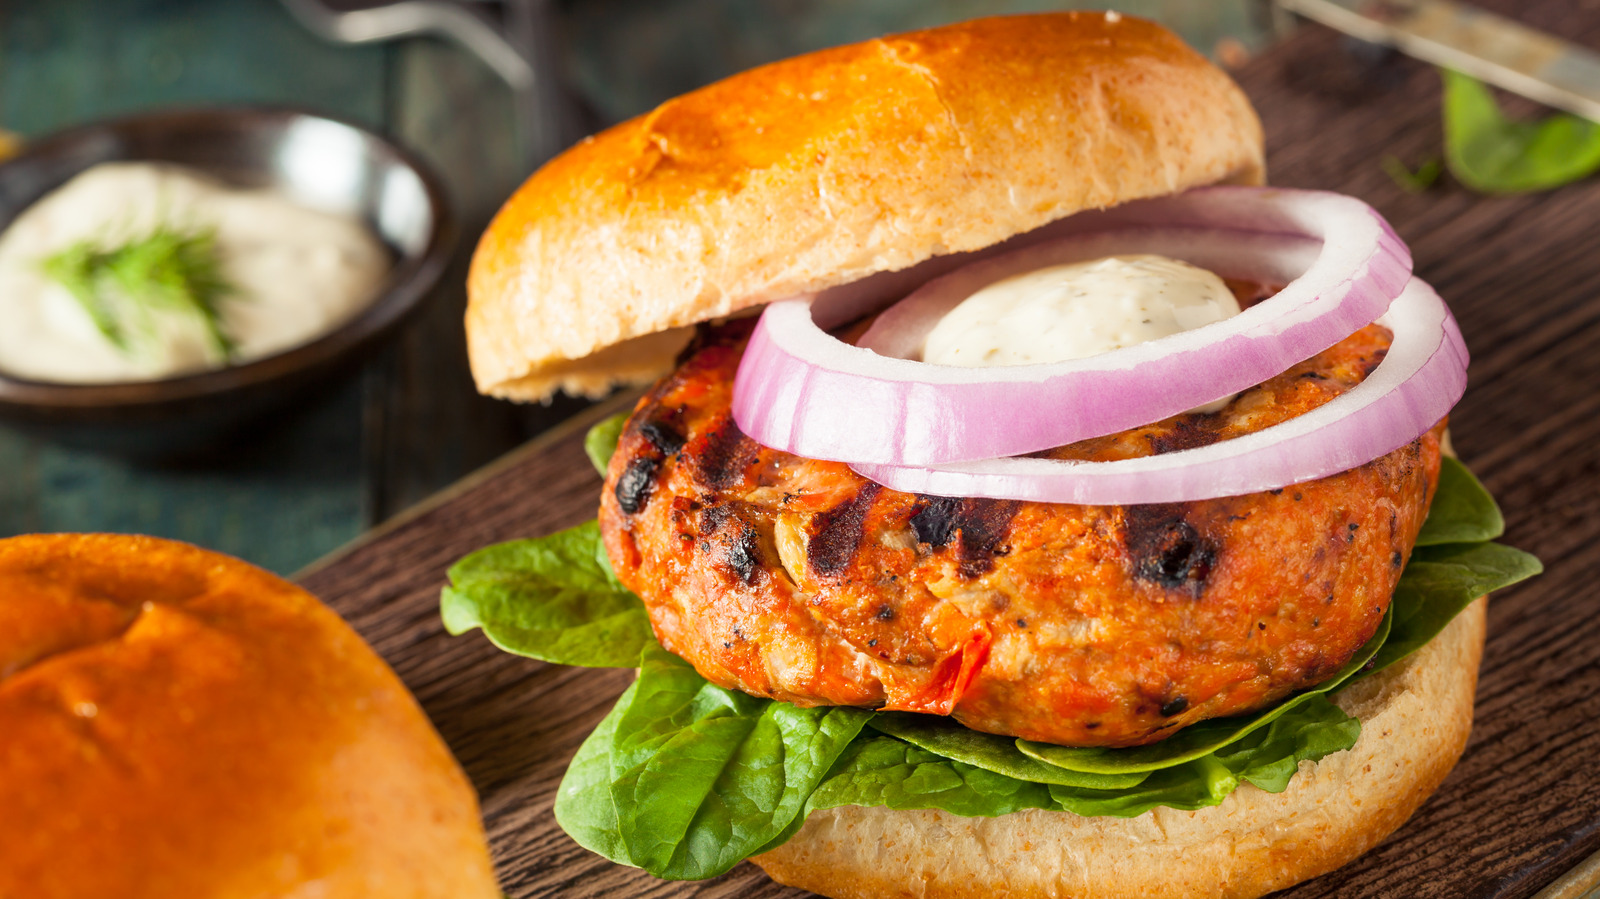 https://www.thedailymeal.com/img/gallery/12-ways-to-take-your-salmon-burgers-up-a-notch/l-intro-1676052588.jpg